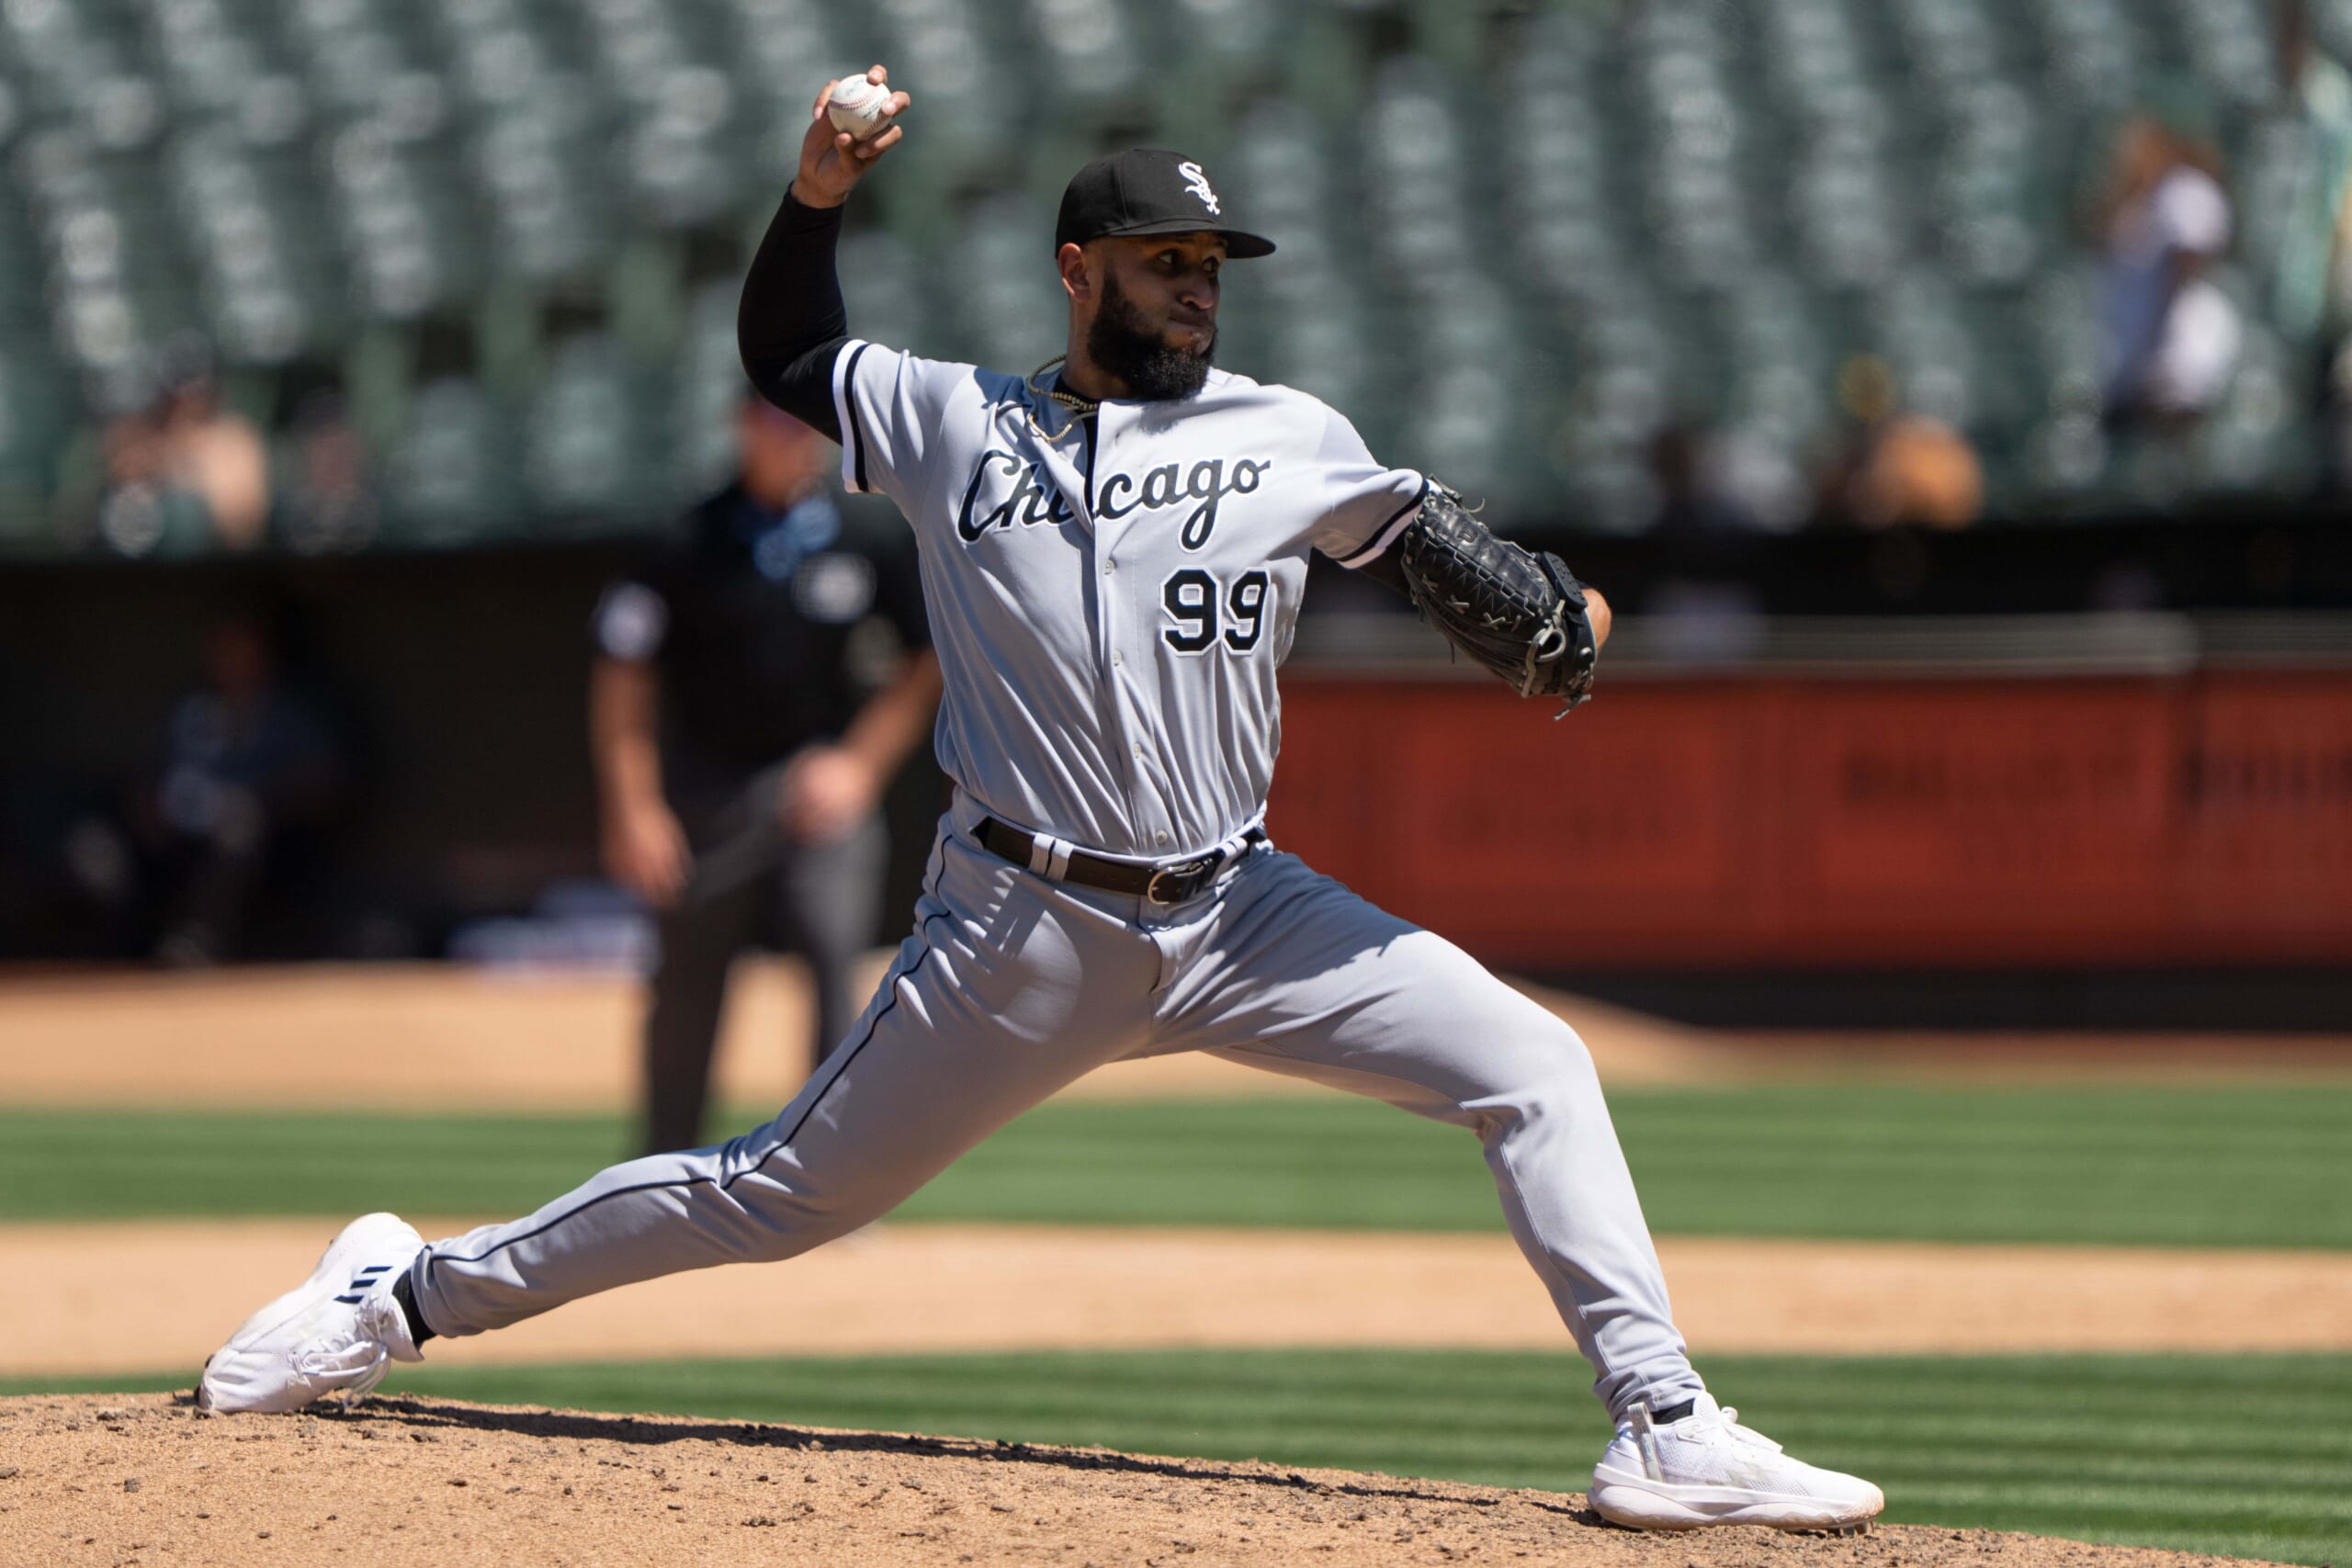 Yankees acquire bullpen arm from White Sox